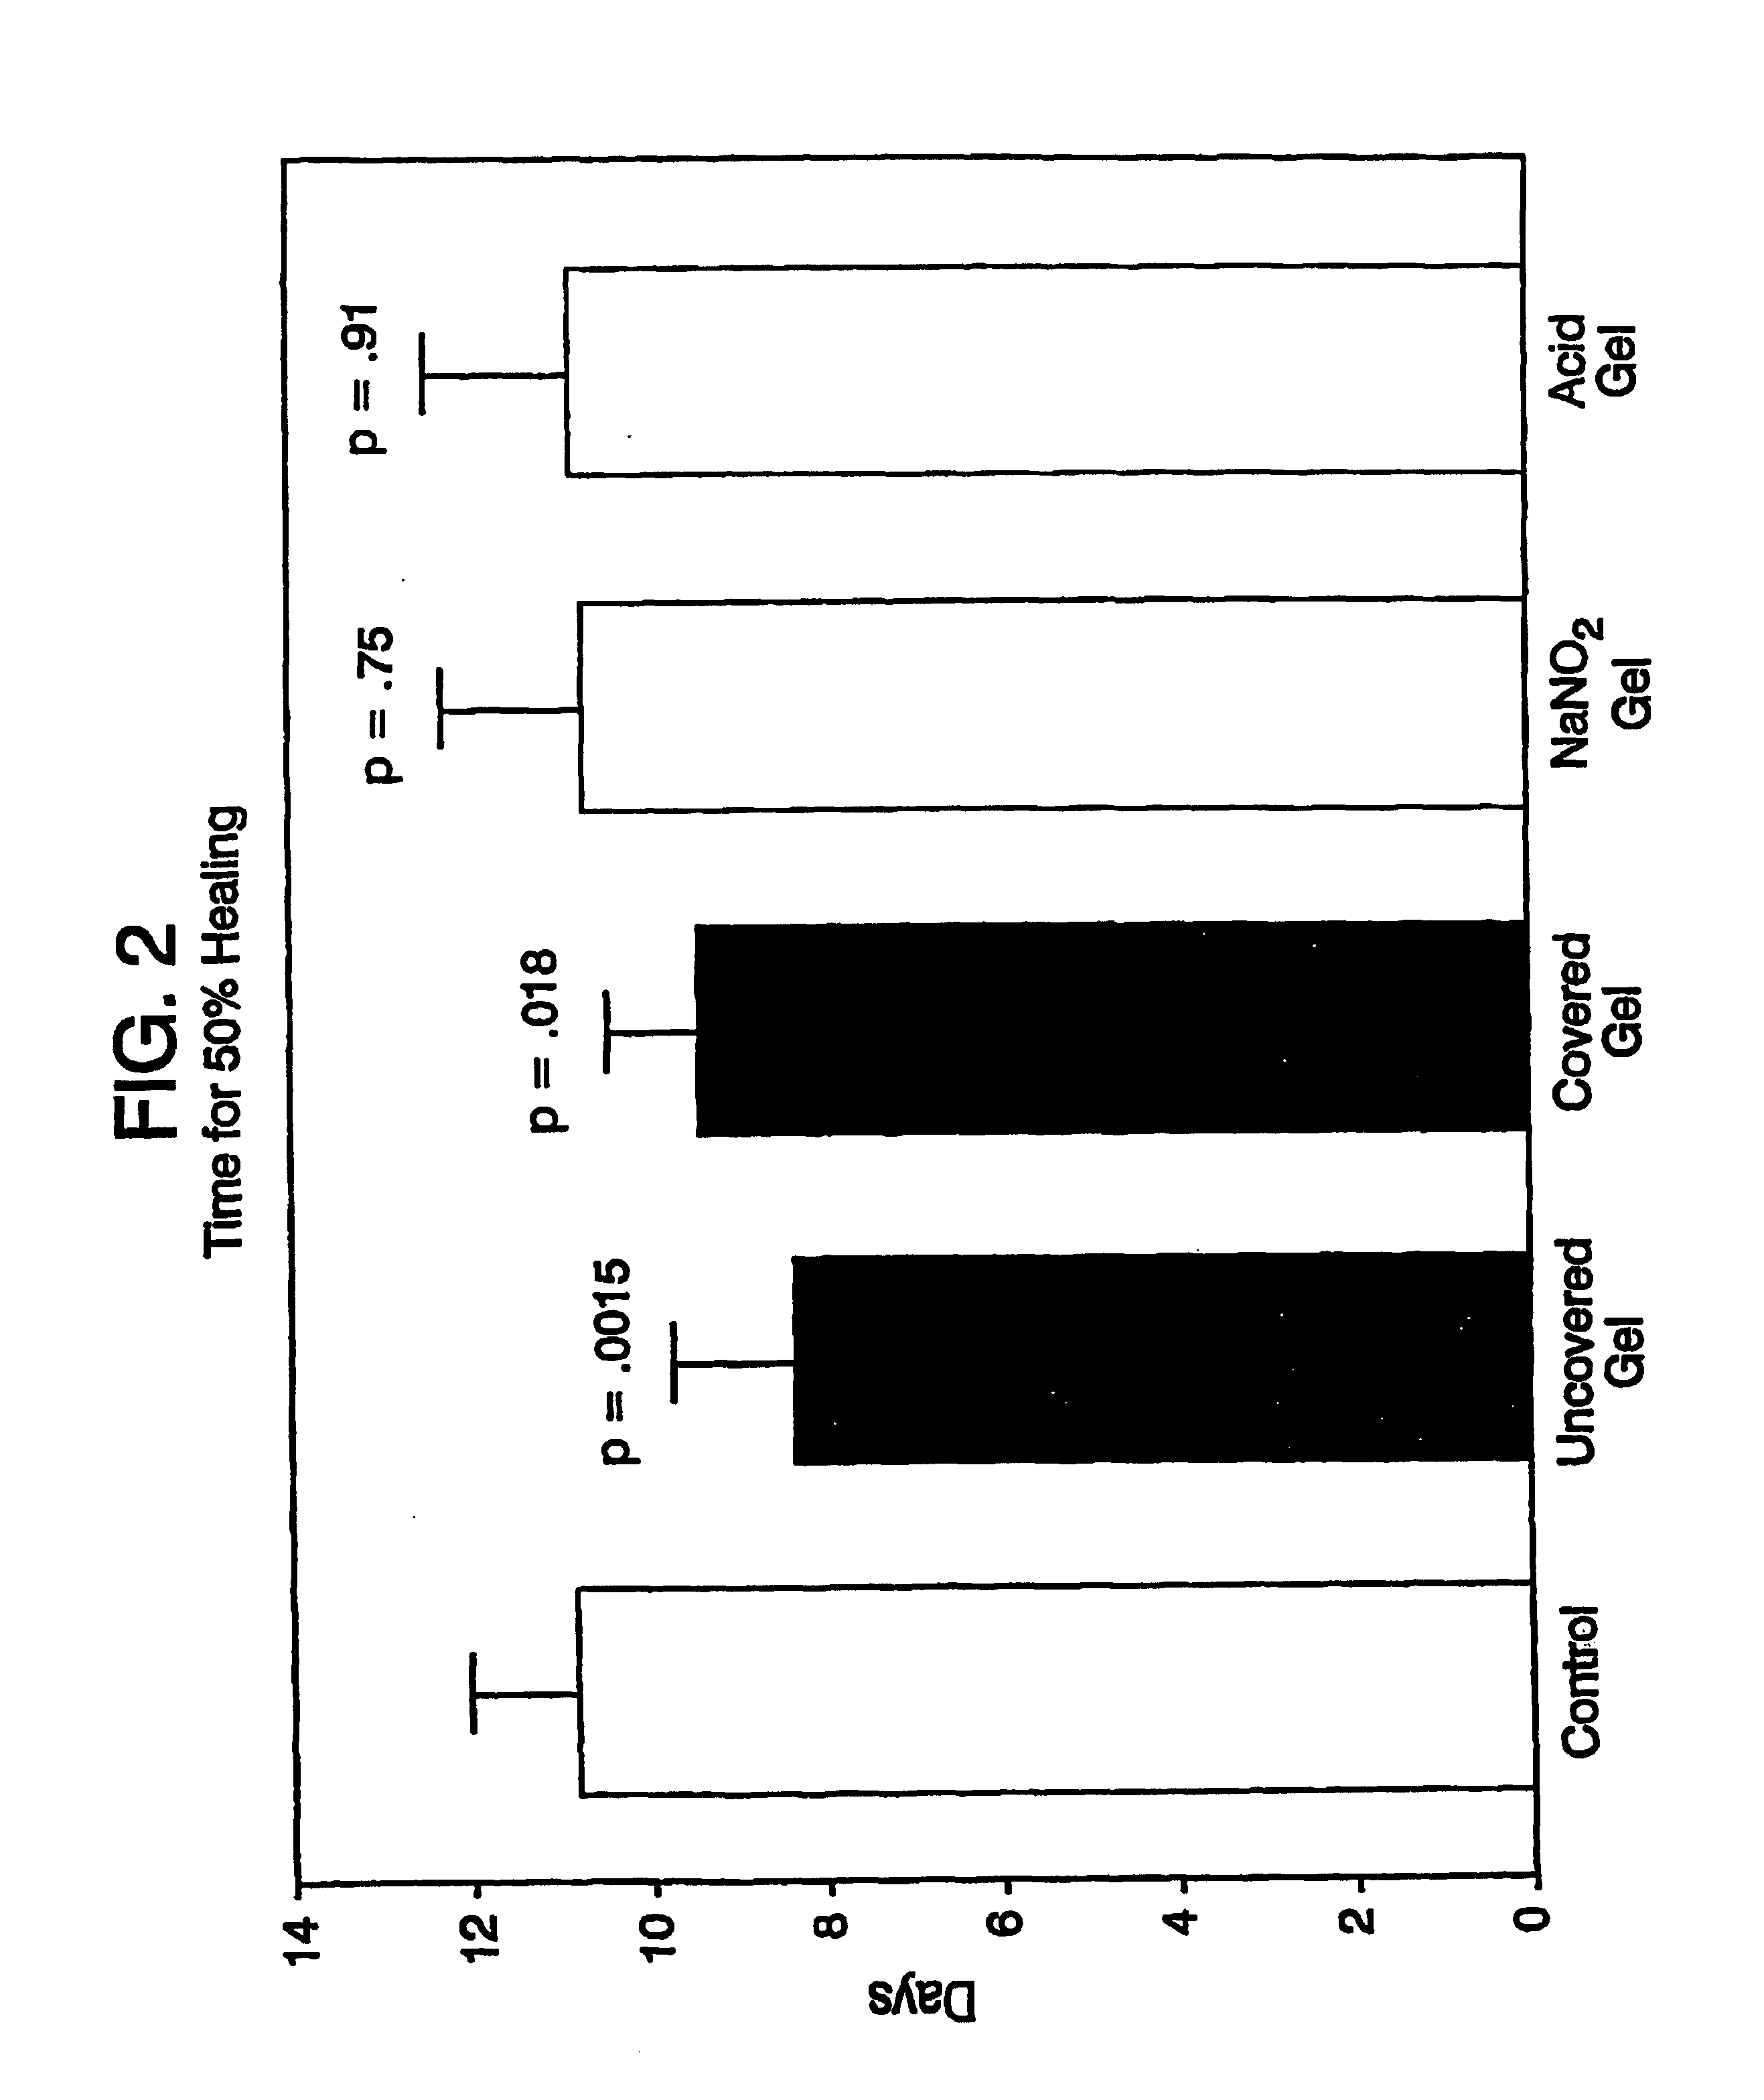 Systems and methods for topical treatment with nitric oxide